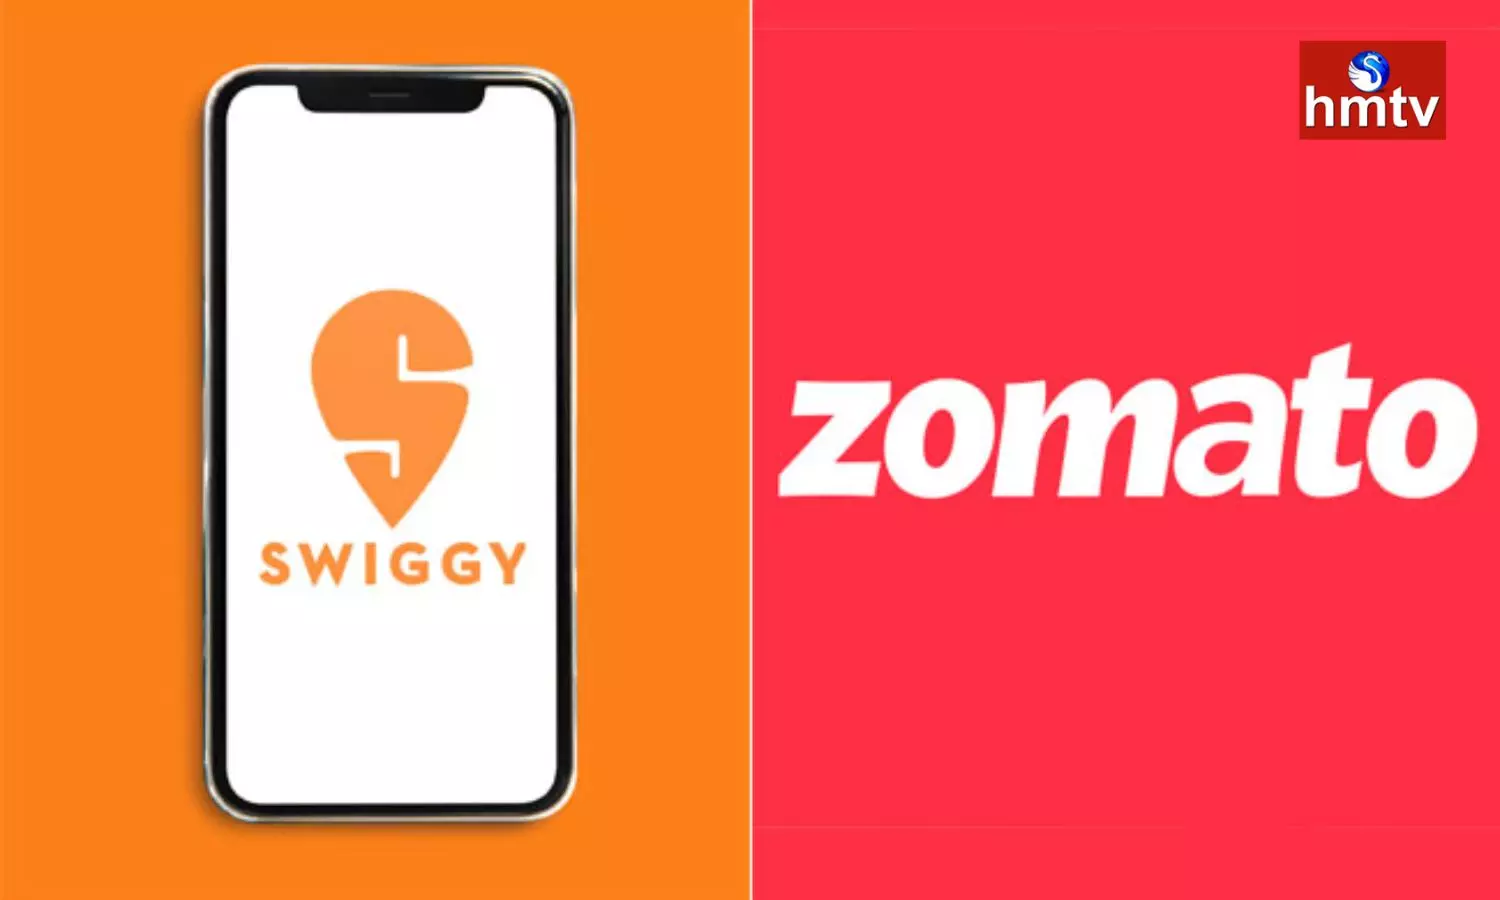 Swiggy's dig on Zomato & Uber: Audacious or a great marketing technique?